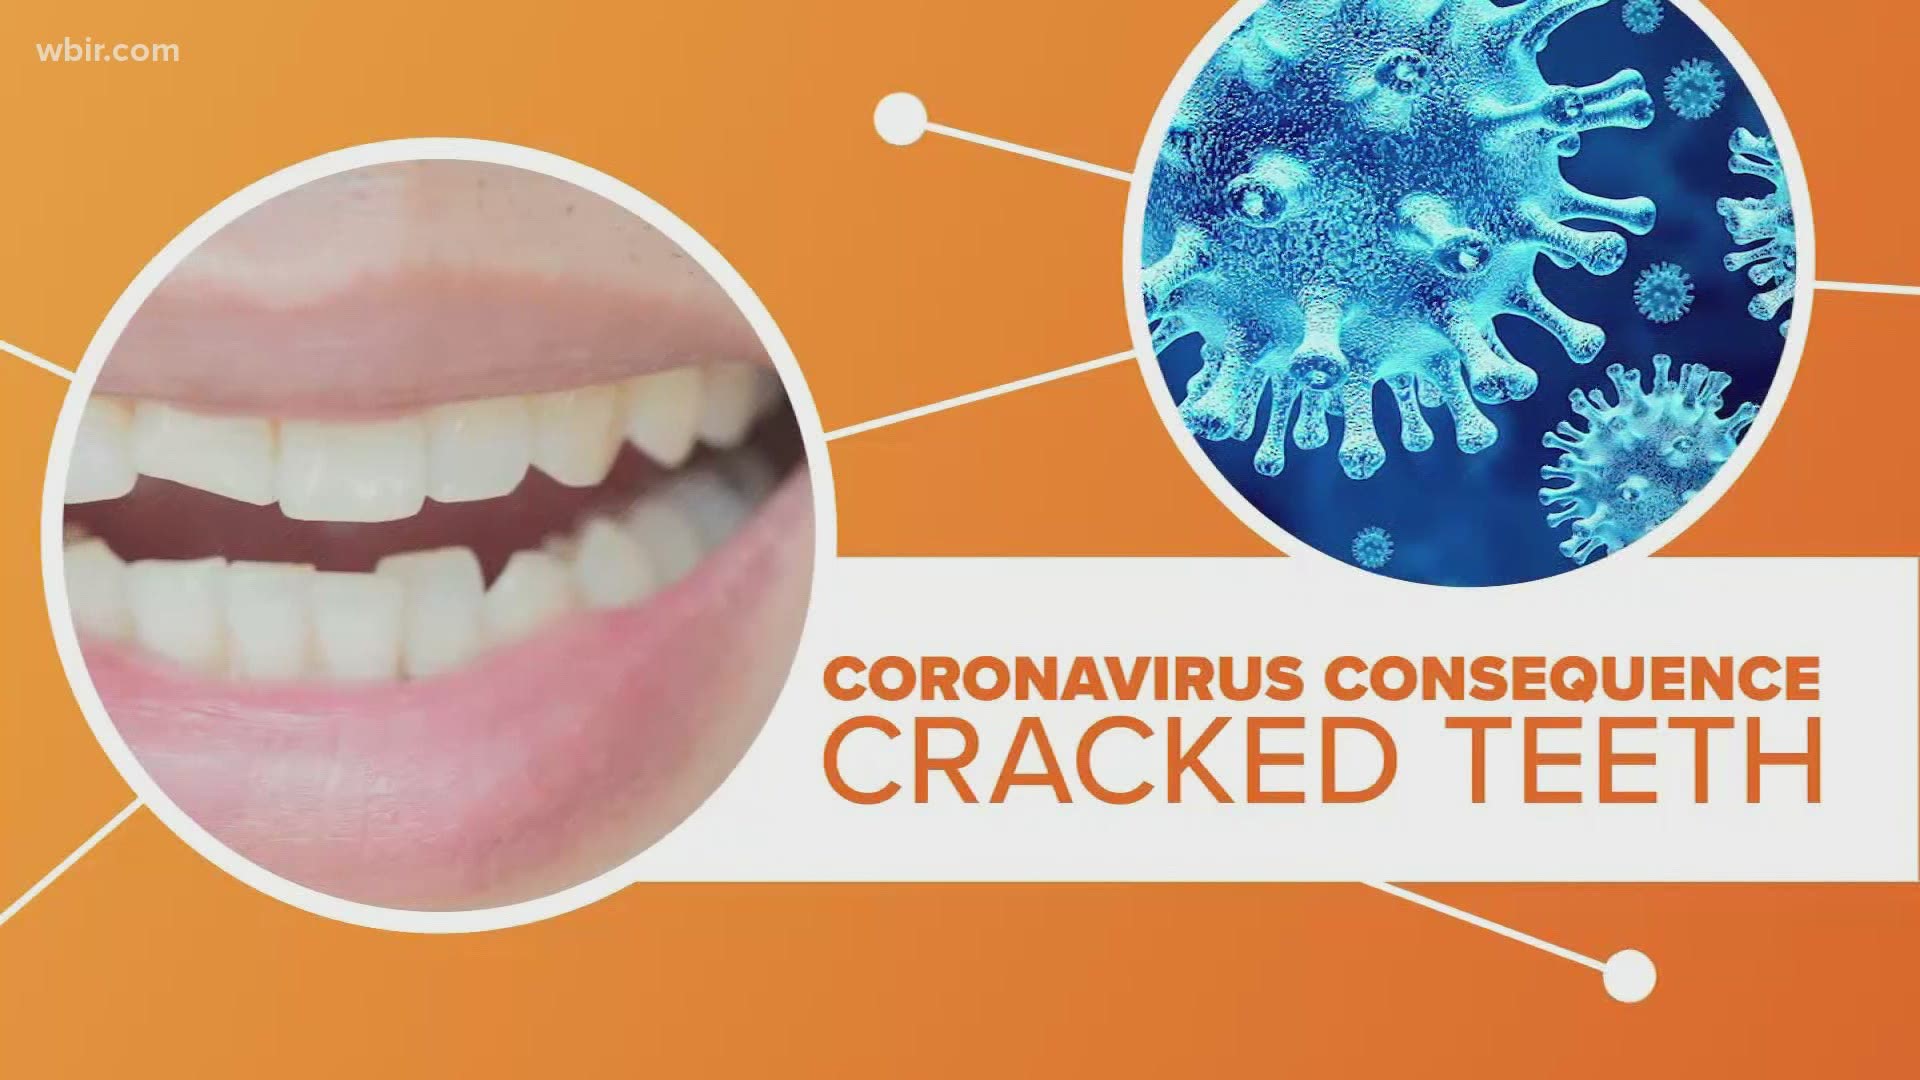 We are seeing some strange consequences from the coronavirus pandemic and that apparently includes more cracked teeth.